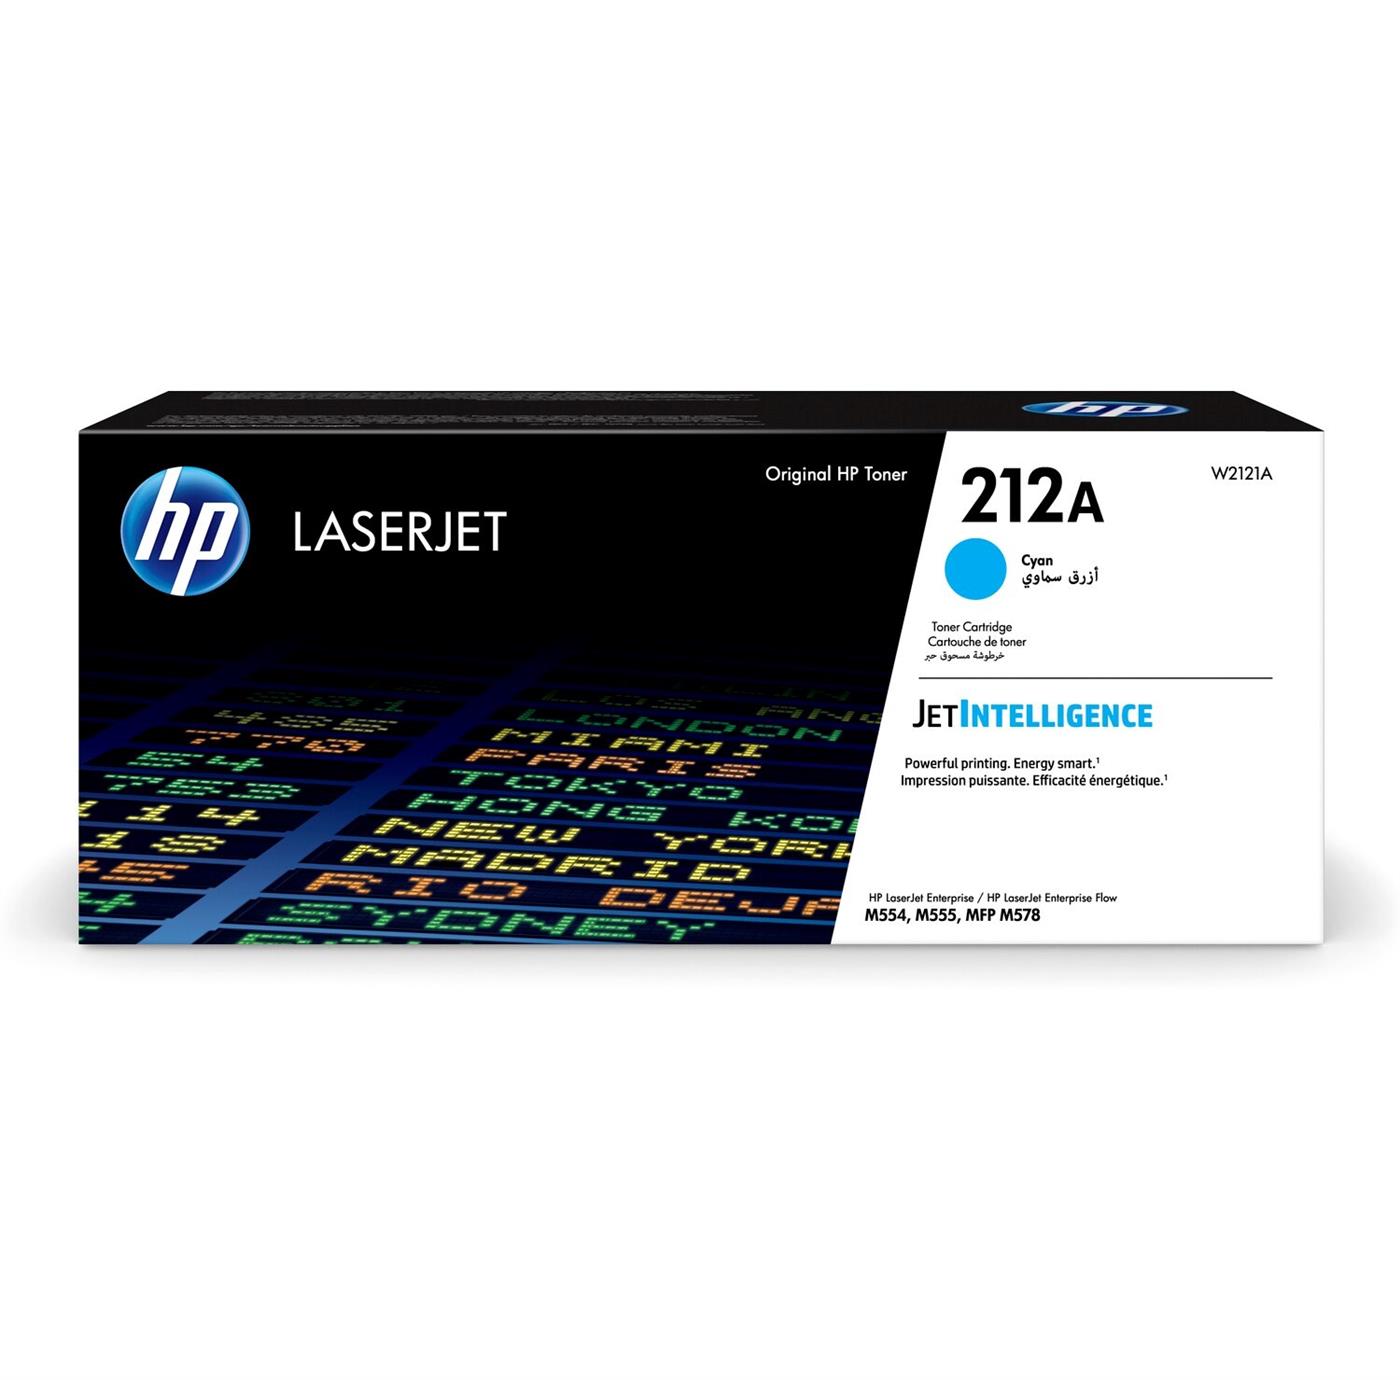 9437575 HP W2121A Toner HP 212A Cyan 4500 sider ved 5 %